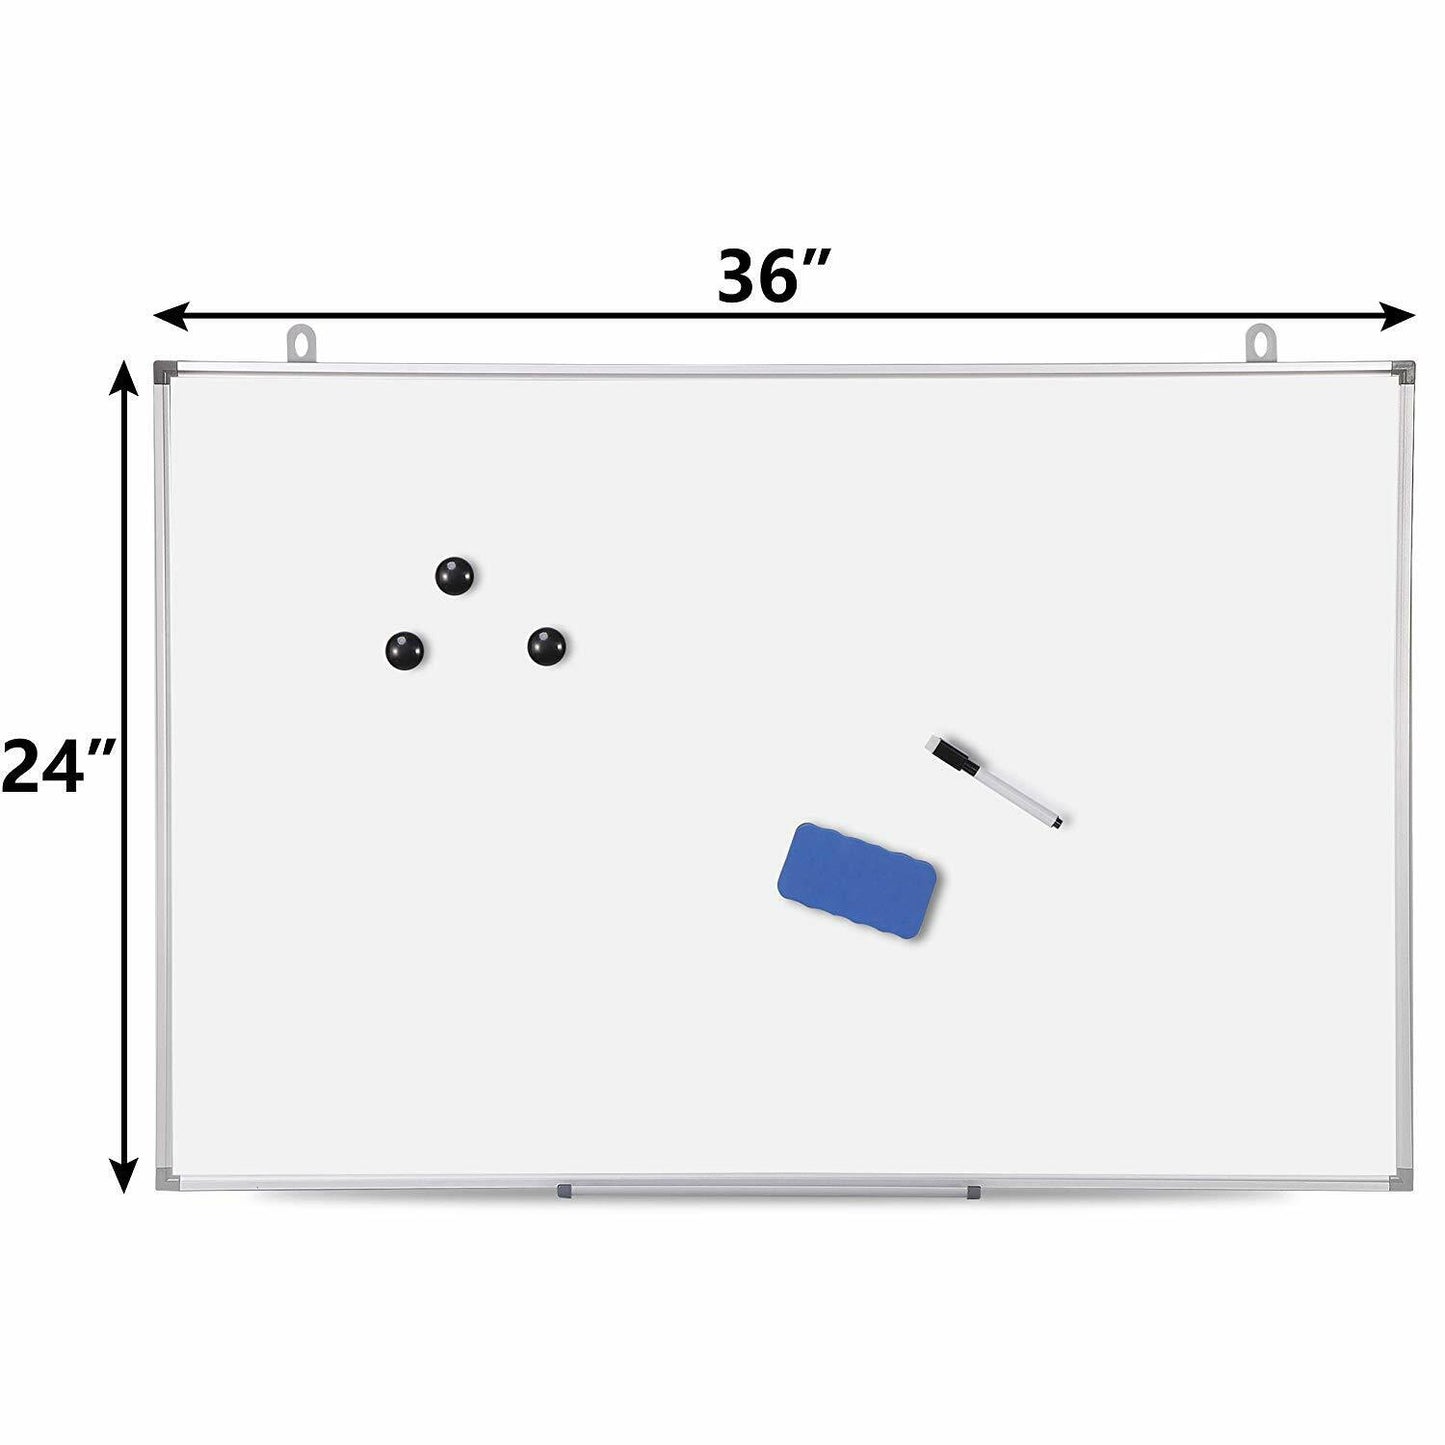 36 x 24 inch Magnetic Whiteboard Wall Hanging Board with Eraser Marker Pen